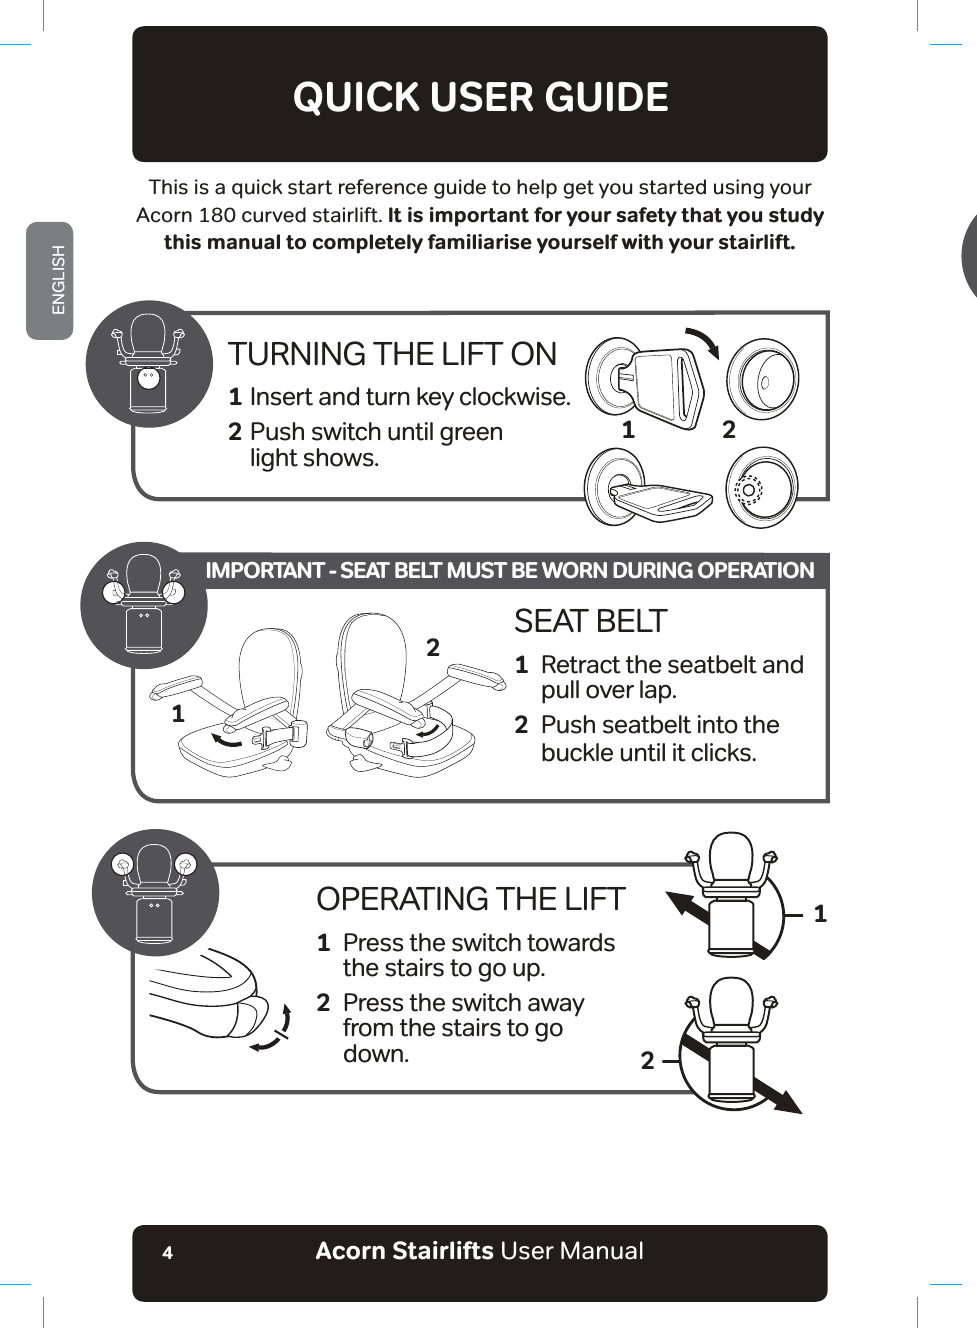 Acorn Stairlifts User ManualENGLISH4QUICK USER GUIDEThis is a quick start reference guide to help get you started using your Acorn 180 curved stairlift. It is important for your safety that you study this manual to completely familiarise yourself with your stairlift.TURNING THE LIFT ON1 Insert and turn key clockwise.2 Push switch until green        light shows. 2OPERATING THE LIFT1  Press the switch towards    the stairs to go up.2  Press the switch away       from the stairs to go      down.12SEAT BELT1  Retract the seatbelt and   pull over lap.2  Push seatbelt into the   buckle until it clicks.21IMPORTANT - SEAT BELT MUST BE WORN DURING OPERATION17KLVZLOODOORZWKHXVHUWRRSHUDWHWKHKLQJHZKLOVWLQDOLQHRIVLJKW2QFH\RXDUHƶQLVKHGXVLQJWKHVWDLUOLIWDQLQWHUPHGLDWHFKDUJHSRLQWLIƶWWHGRUWKHWRSFKDUJHSRLQW